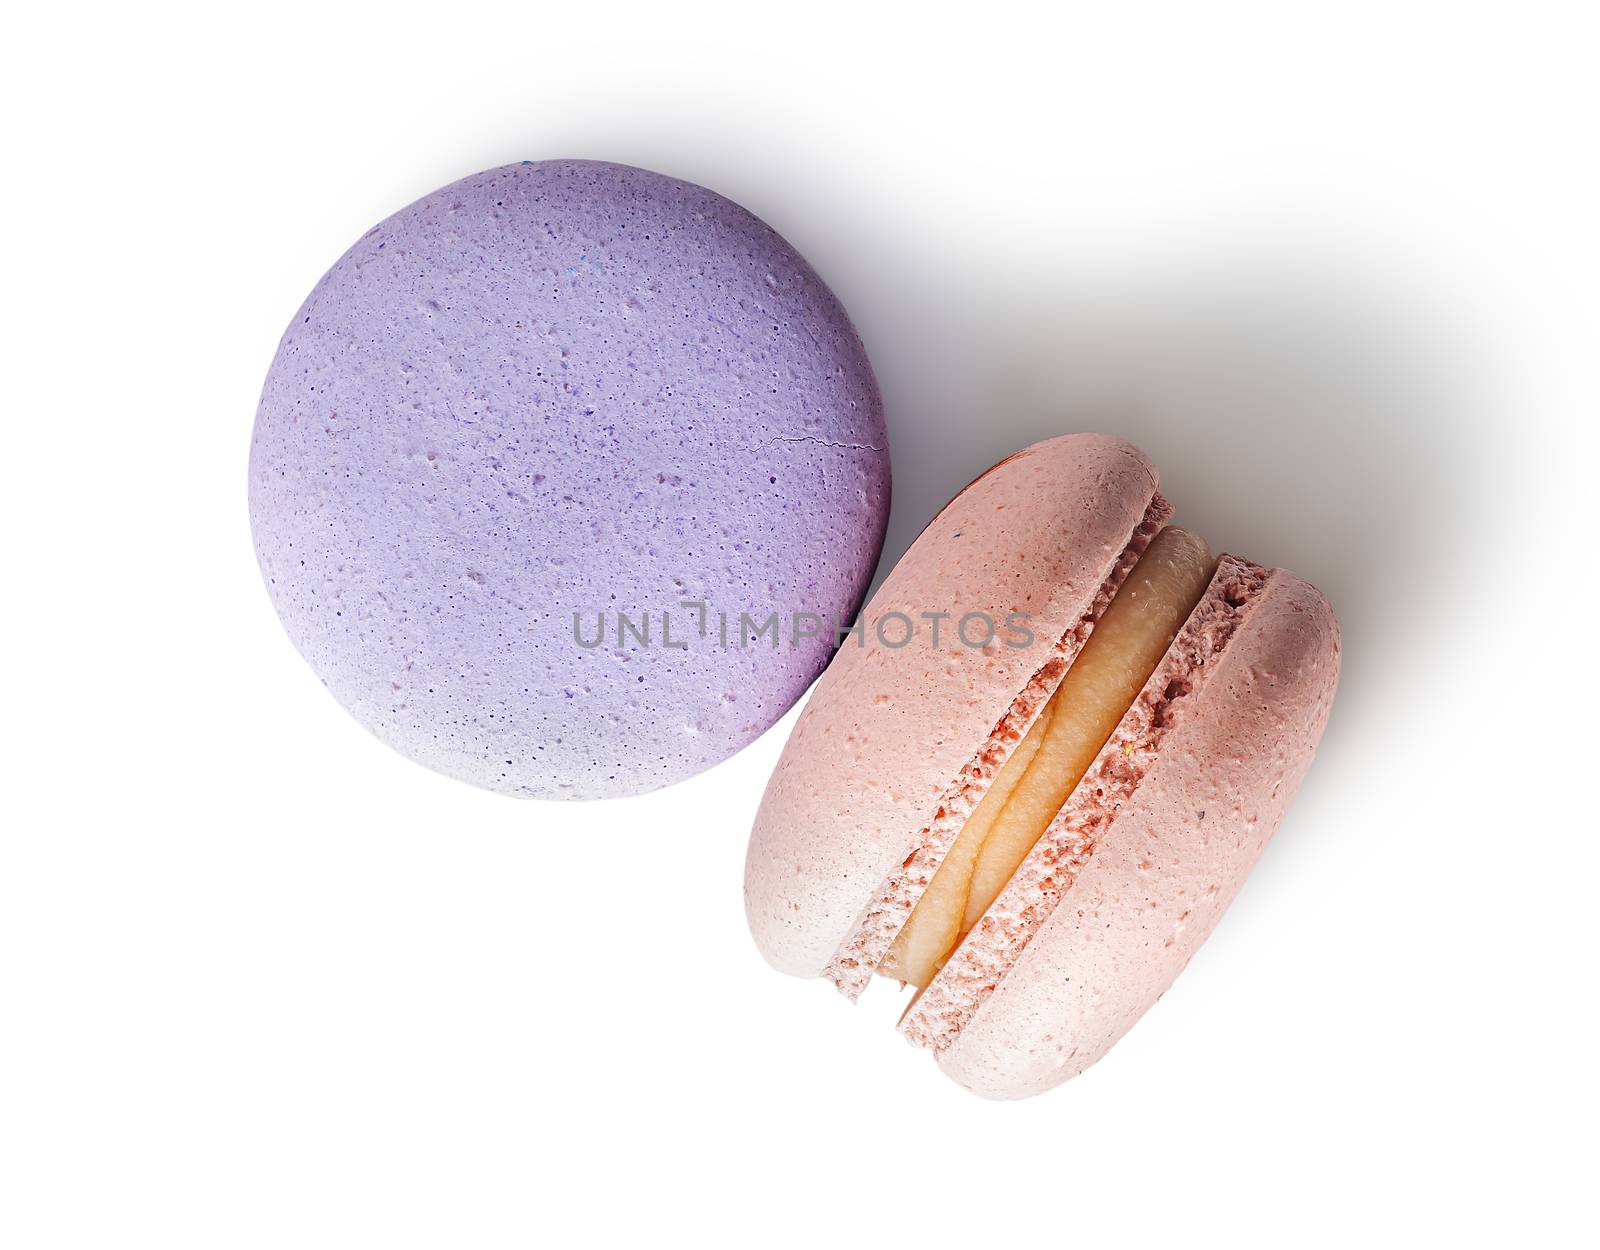 Two macaroon purple beige top view on white background